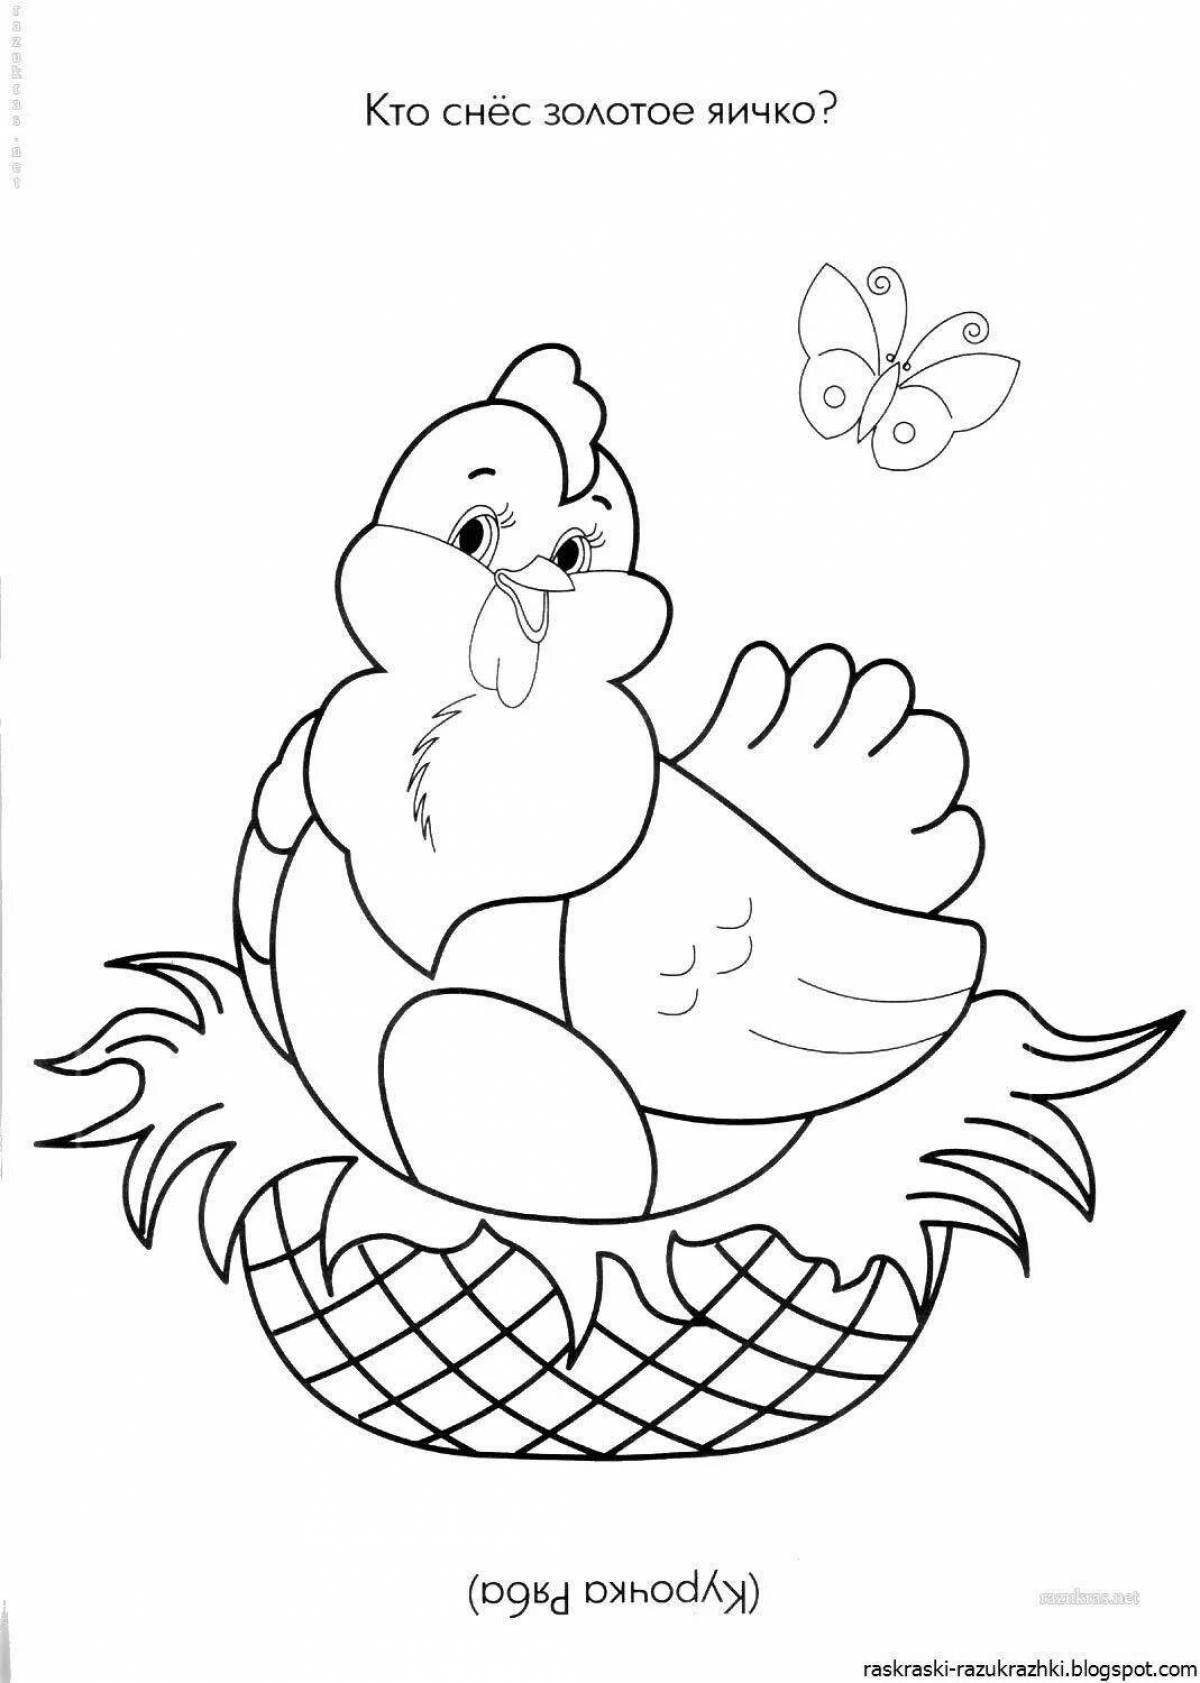 Outstanding chicken pockmarked coloring book for children